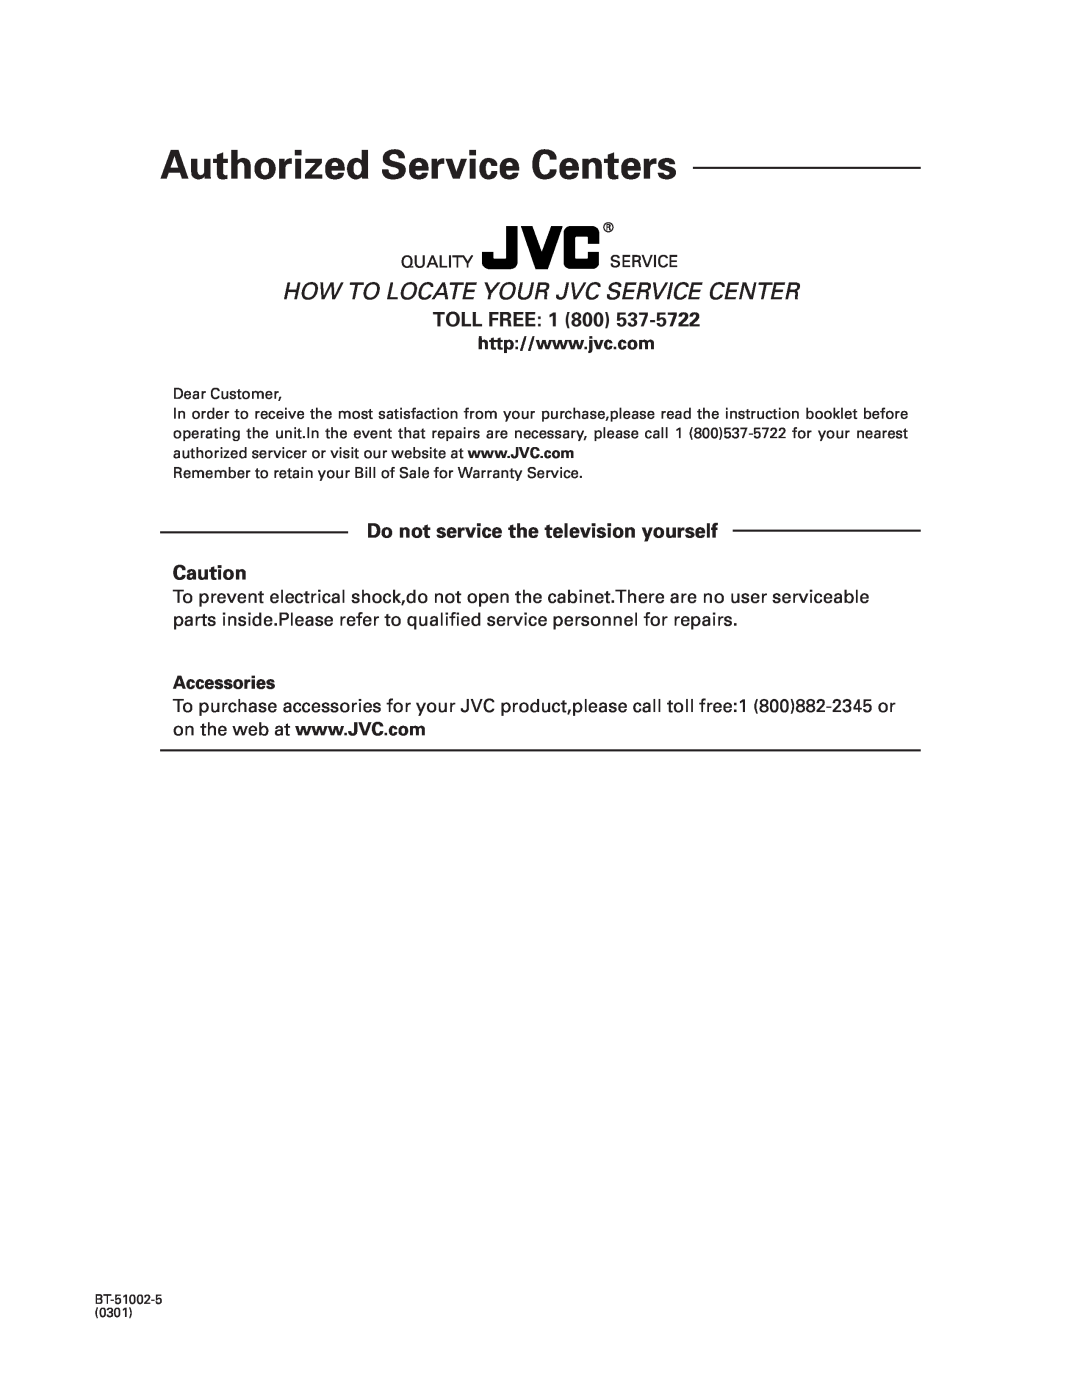 JVC RX-DP20VBK manual Accessories, Authorized Service Centers, How To Locate Your Jvc Service Center, TOLL FREE: 1 800 